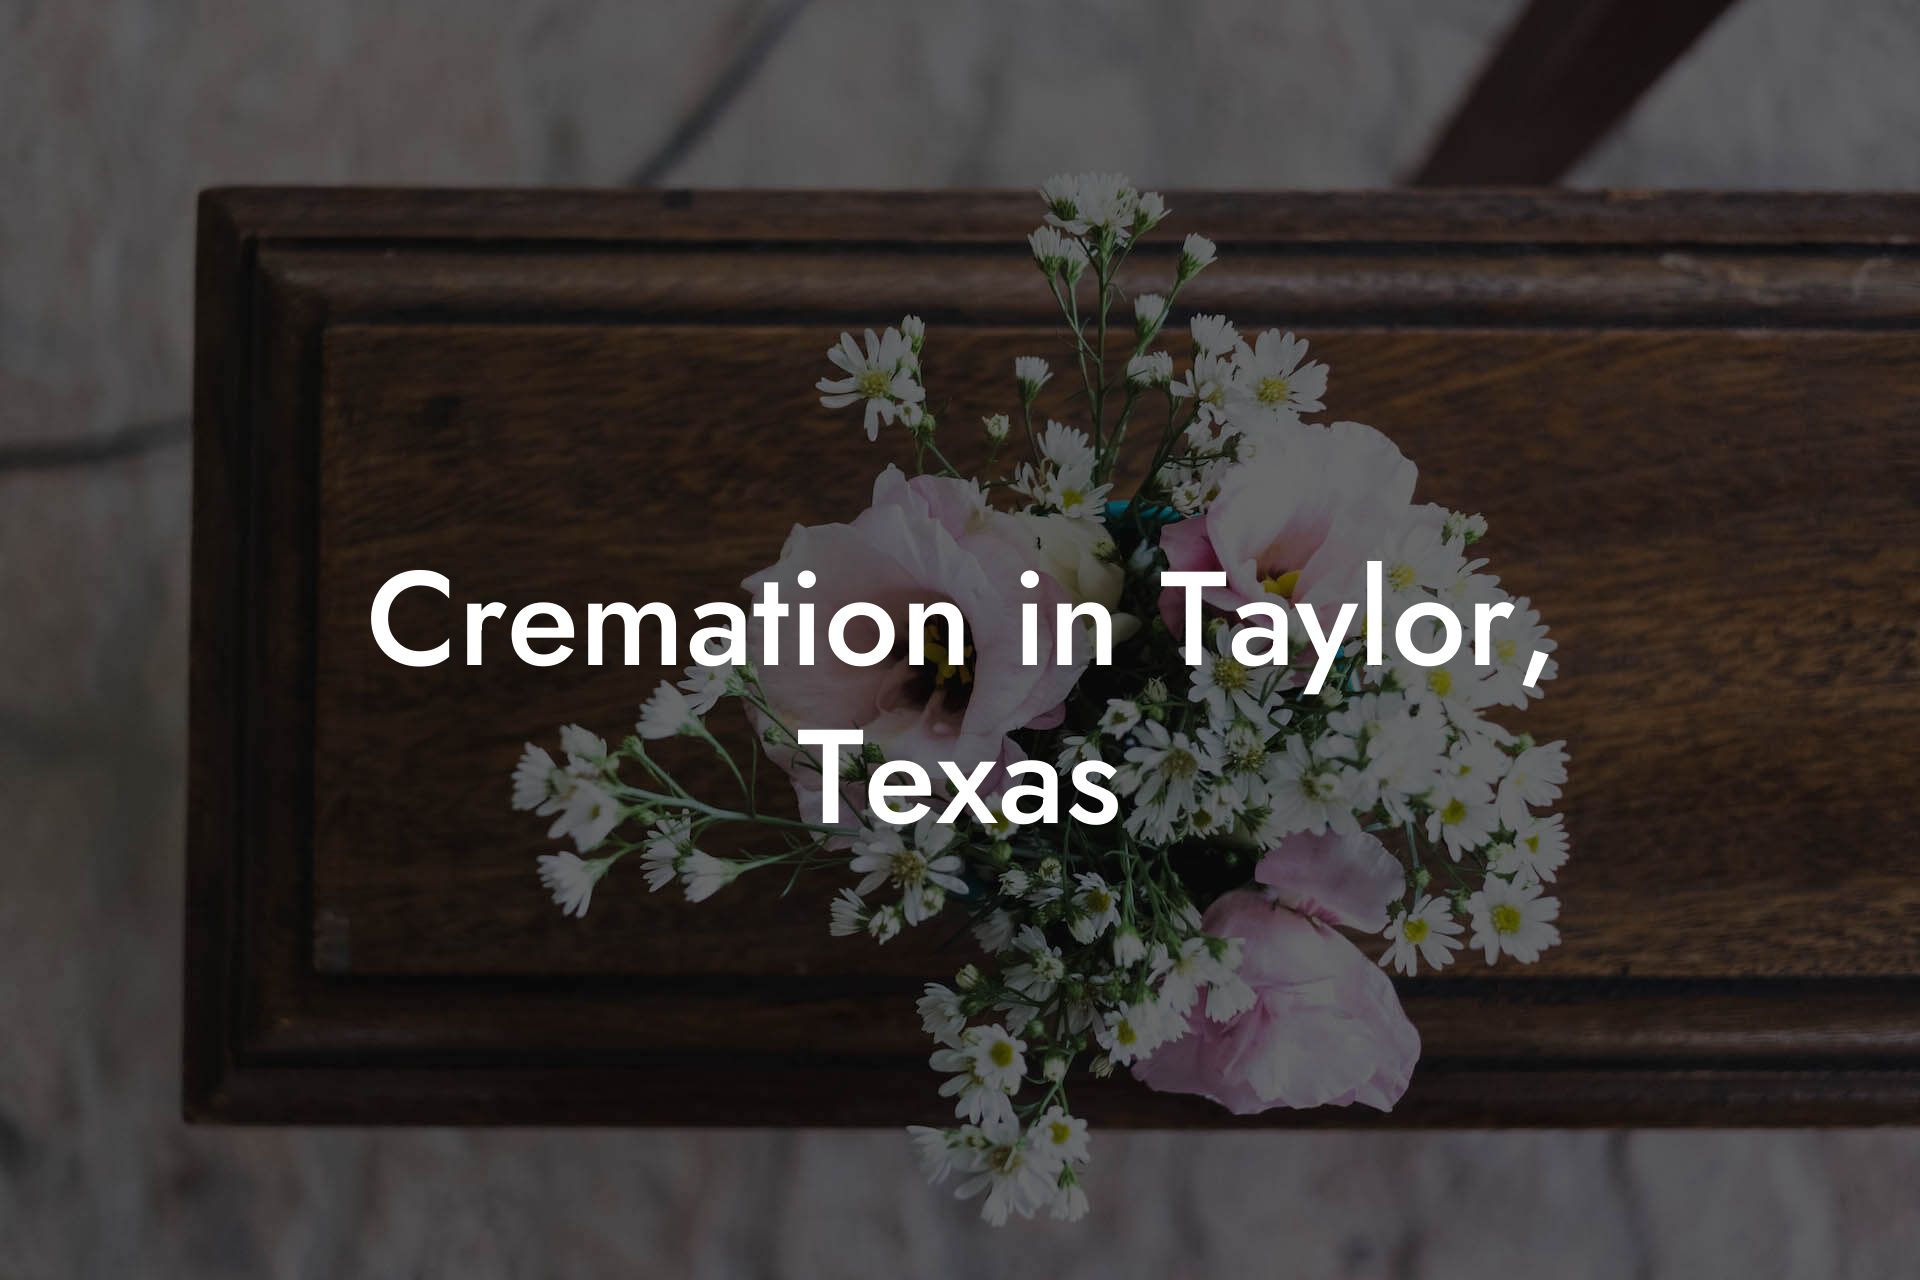 Cremation in Taylor, Texas